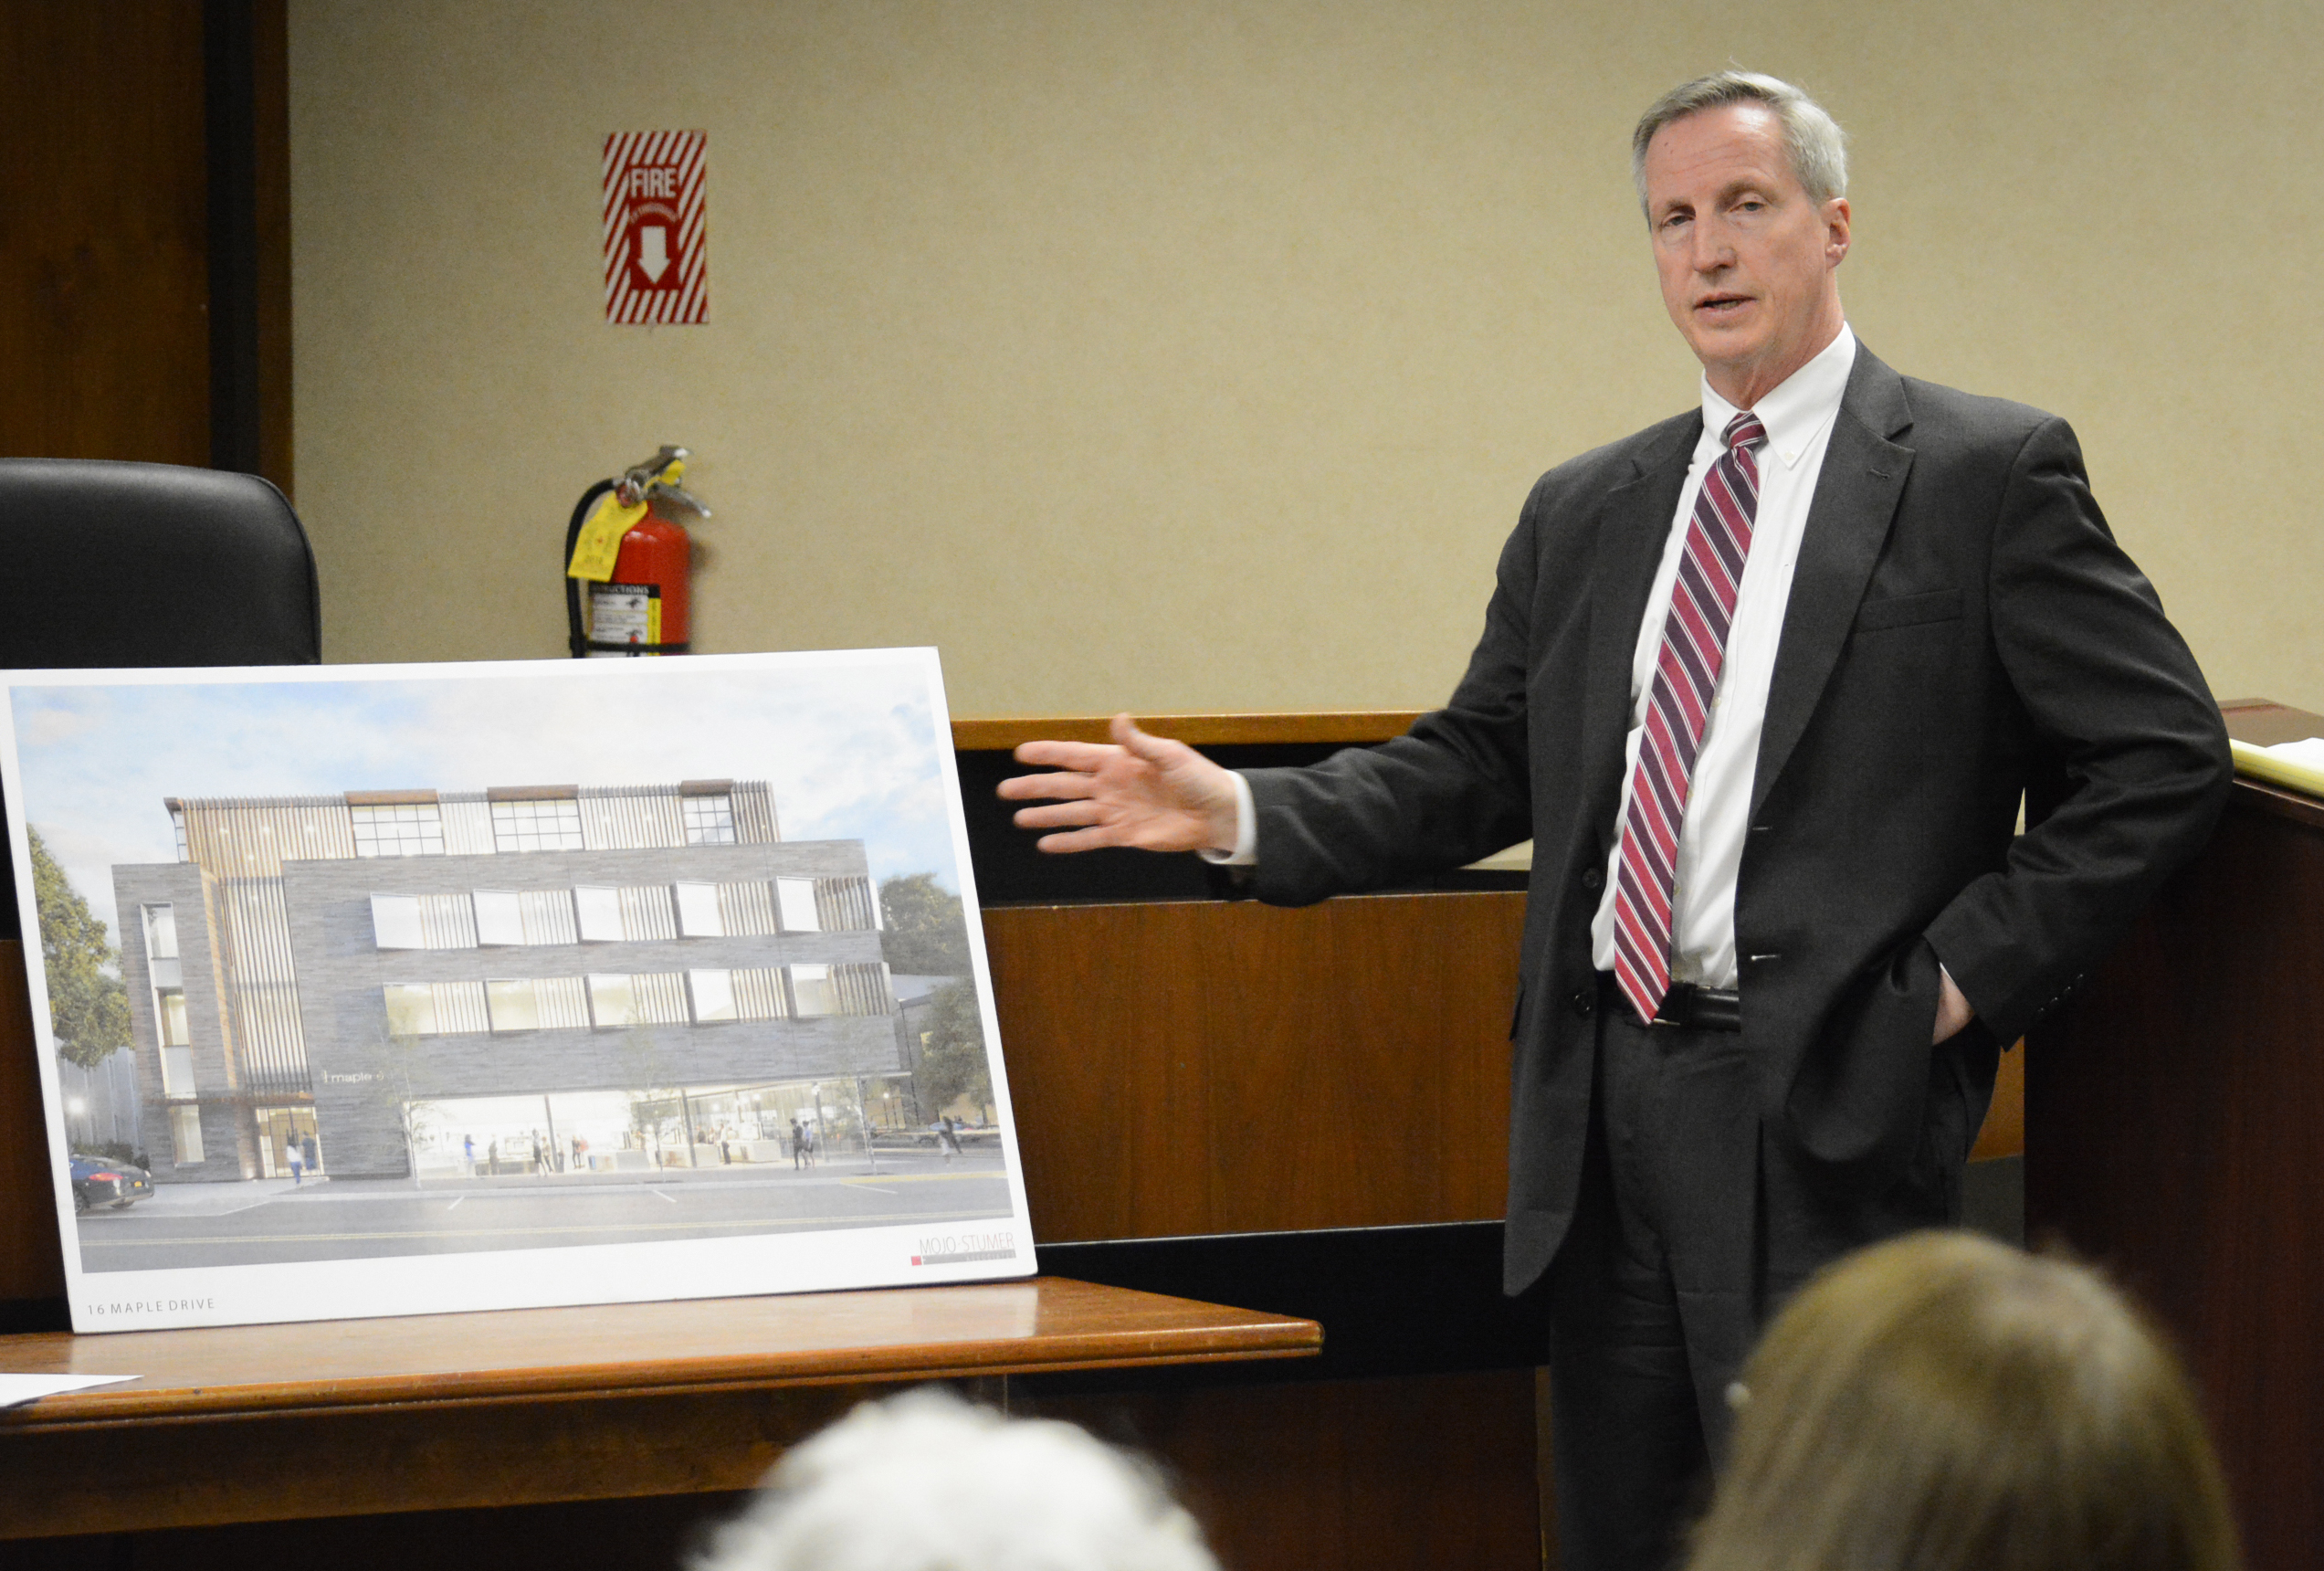 Chris Prior, a legal representative for Spiegel Associates, presents an artist's rendering of its proposed 16 Maple Drive development. (Photo by Janelle Clausen)